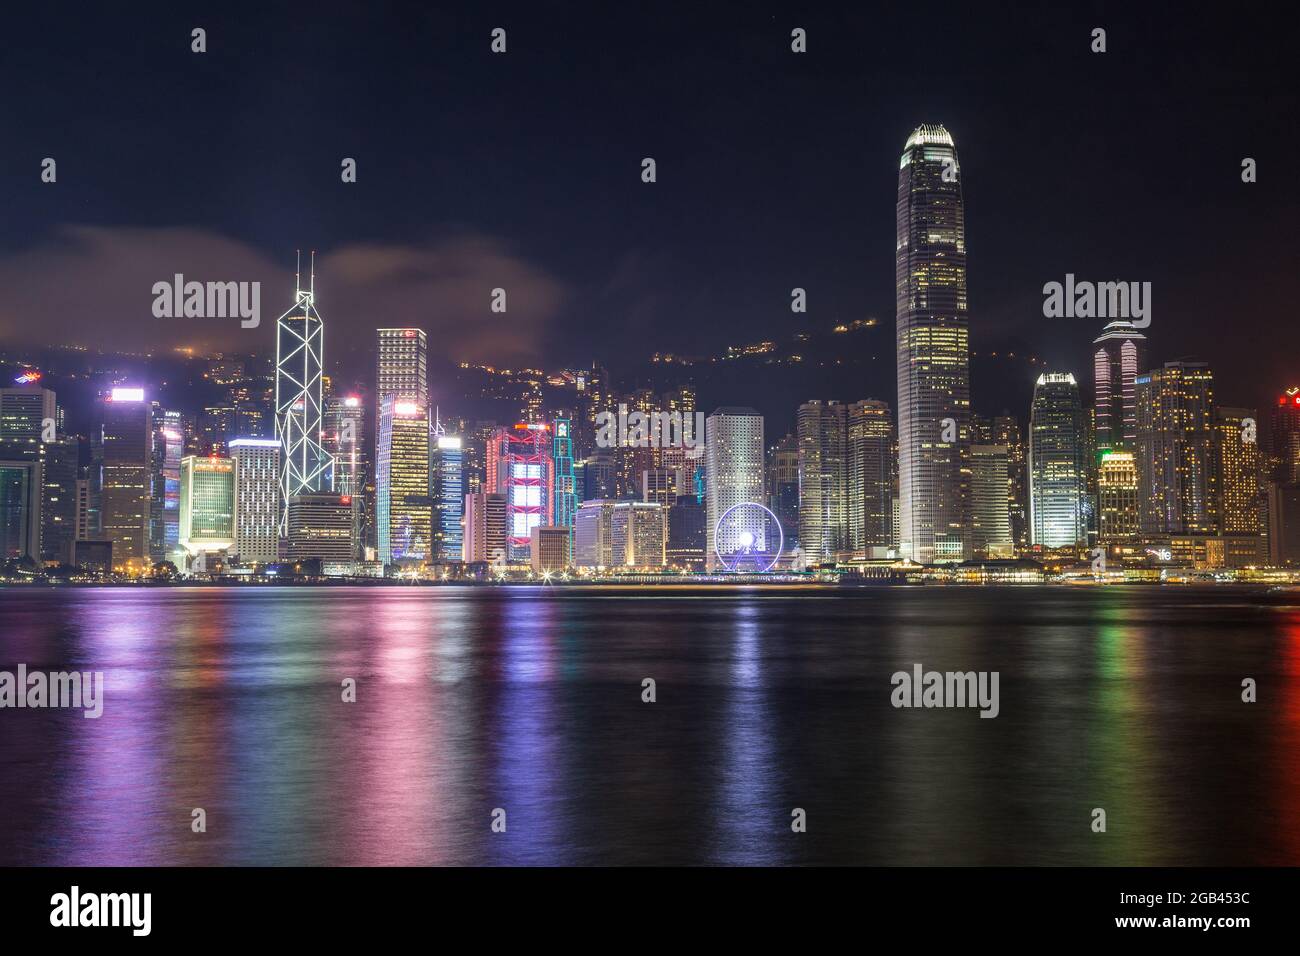 HONG KONG - 8TH APRIL 2017: Hong Kong Island skyline at night with views across Victoria Habour. Skyscrapers and office buildings can be seen. Stock Photo